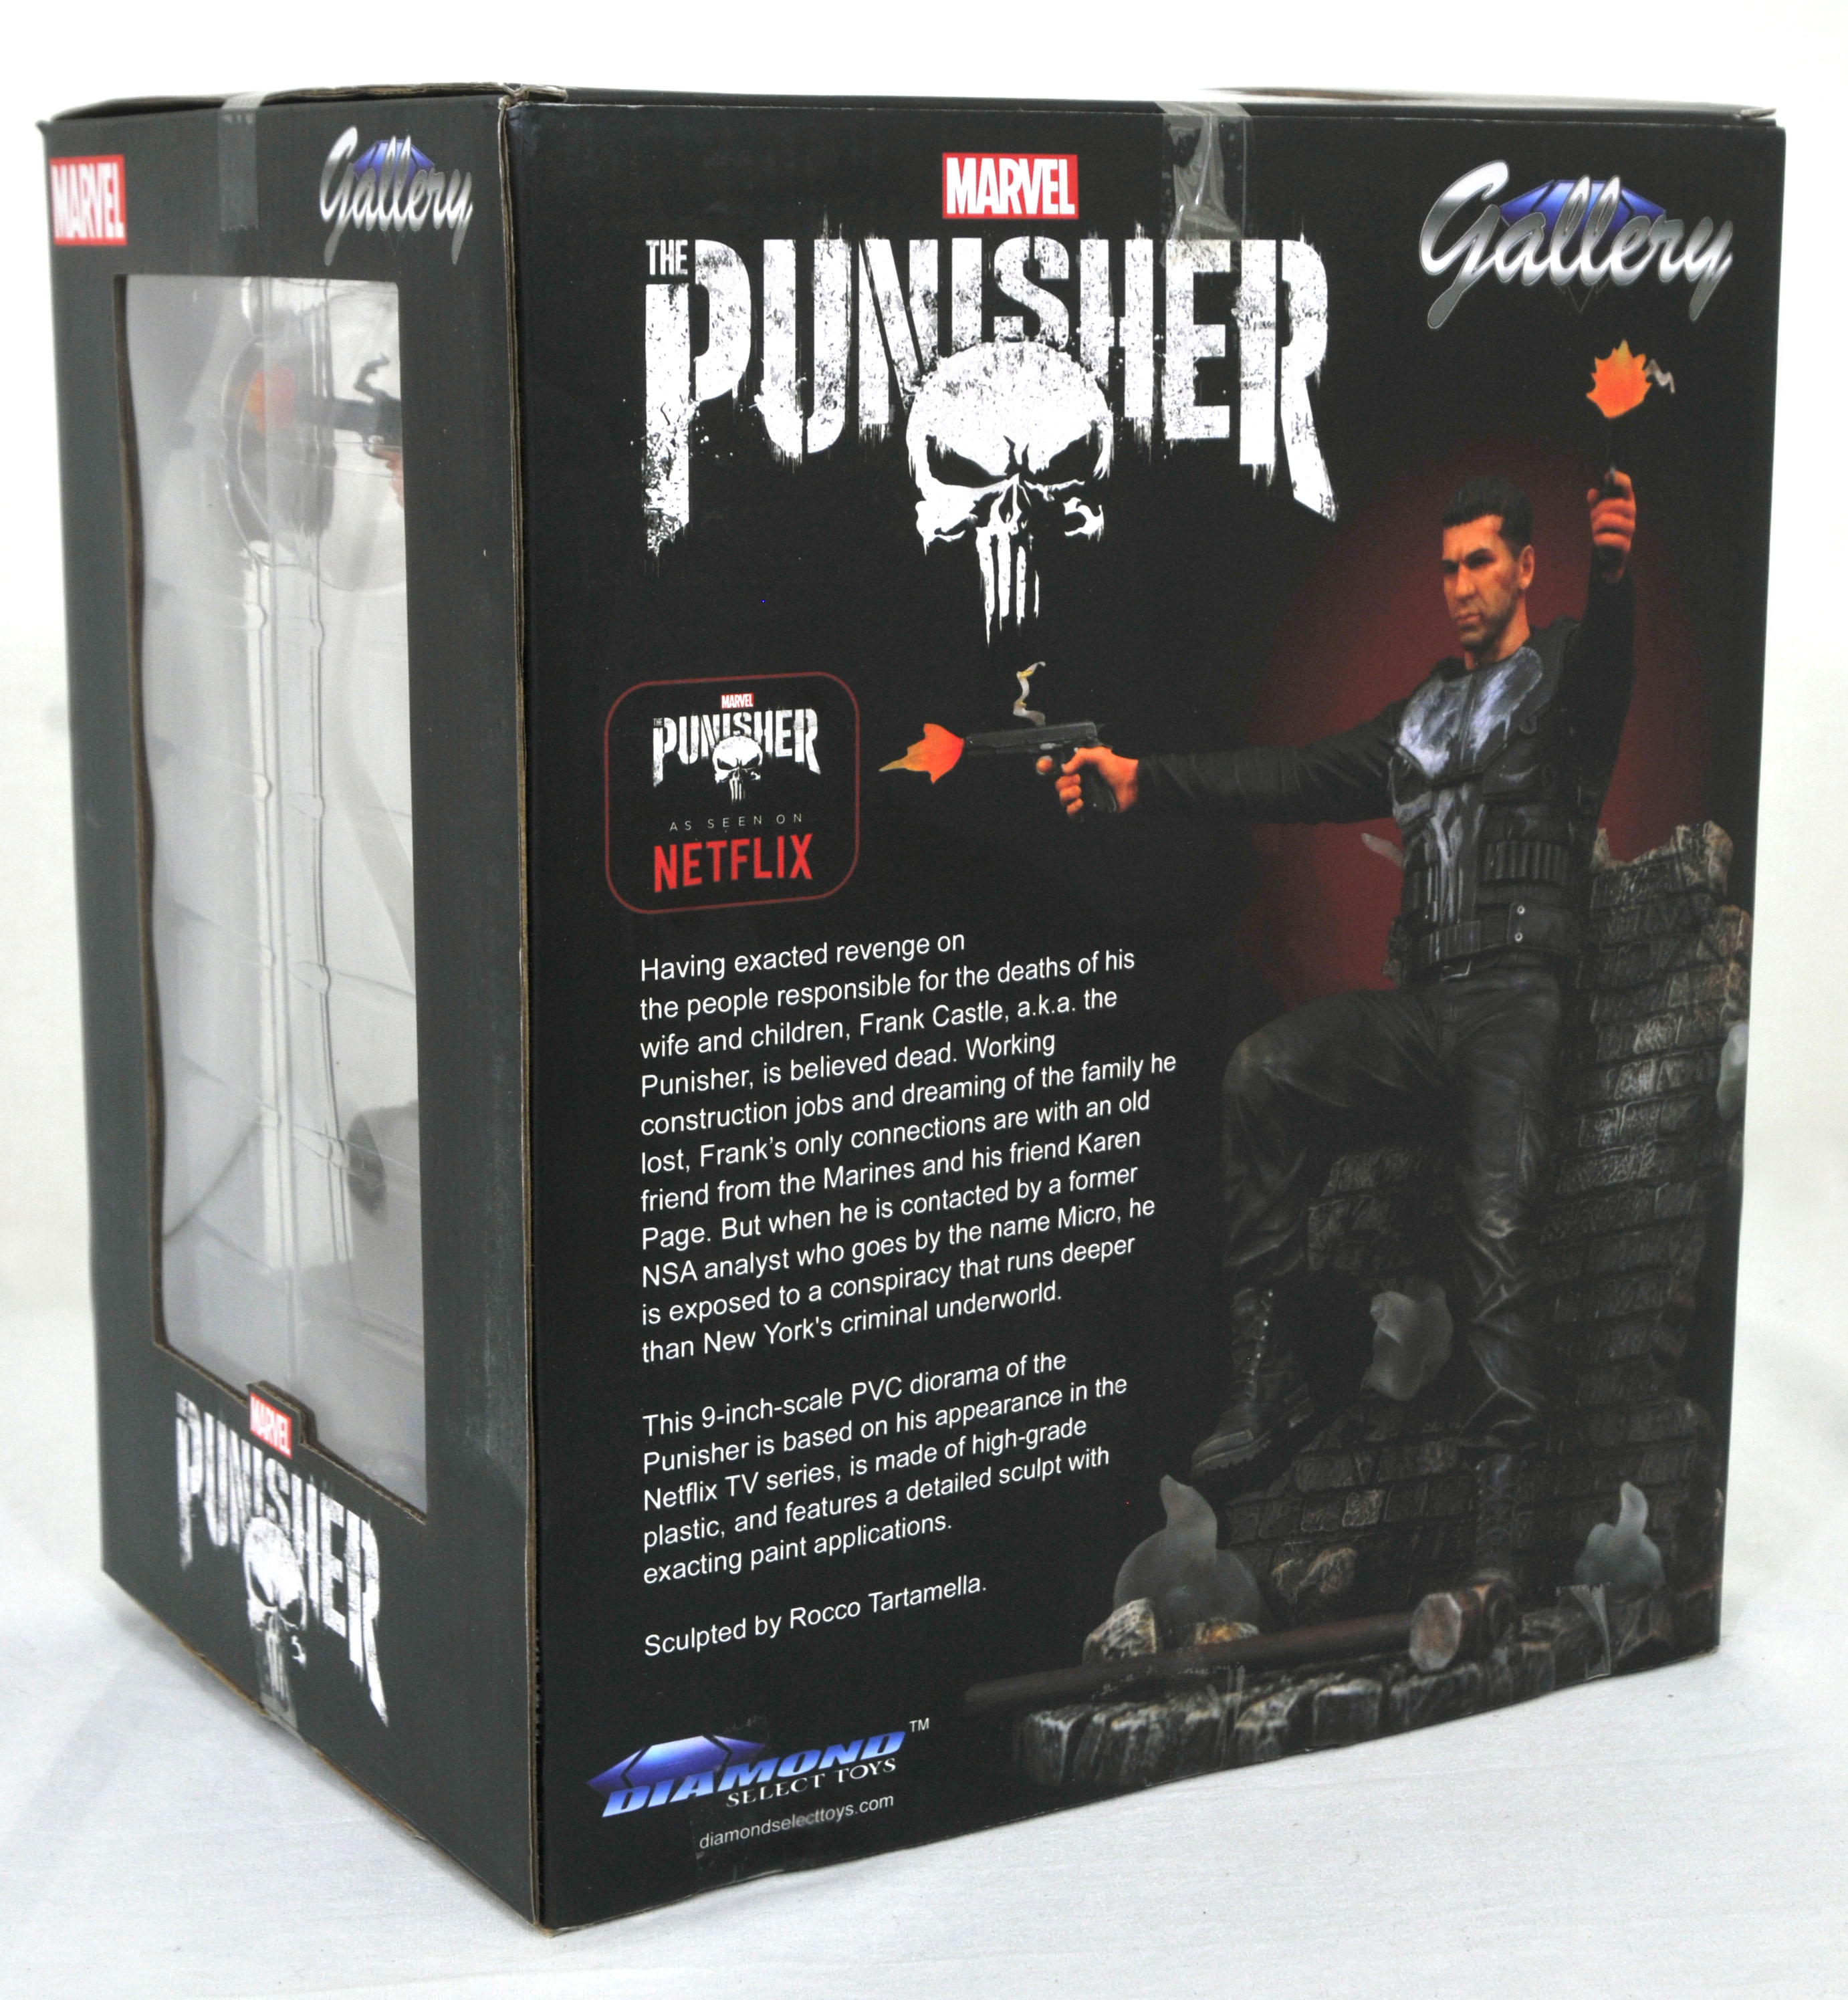 First Look: Marvel Gallery Netflix Punisher PVC Figure from